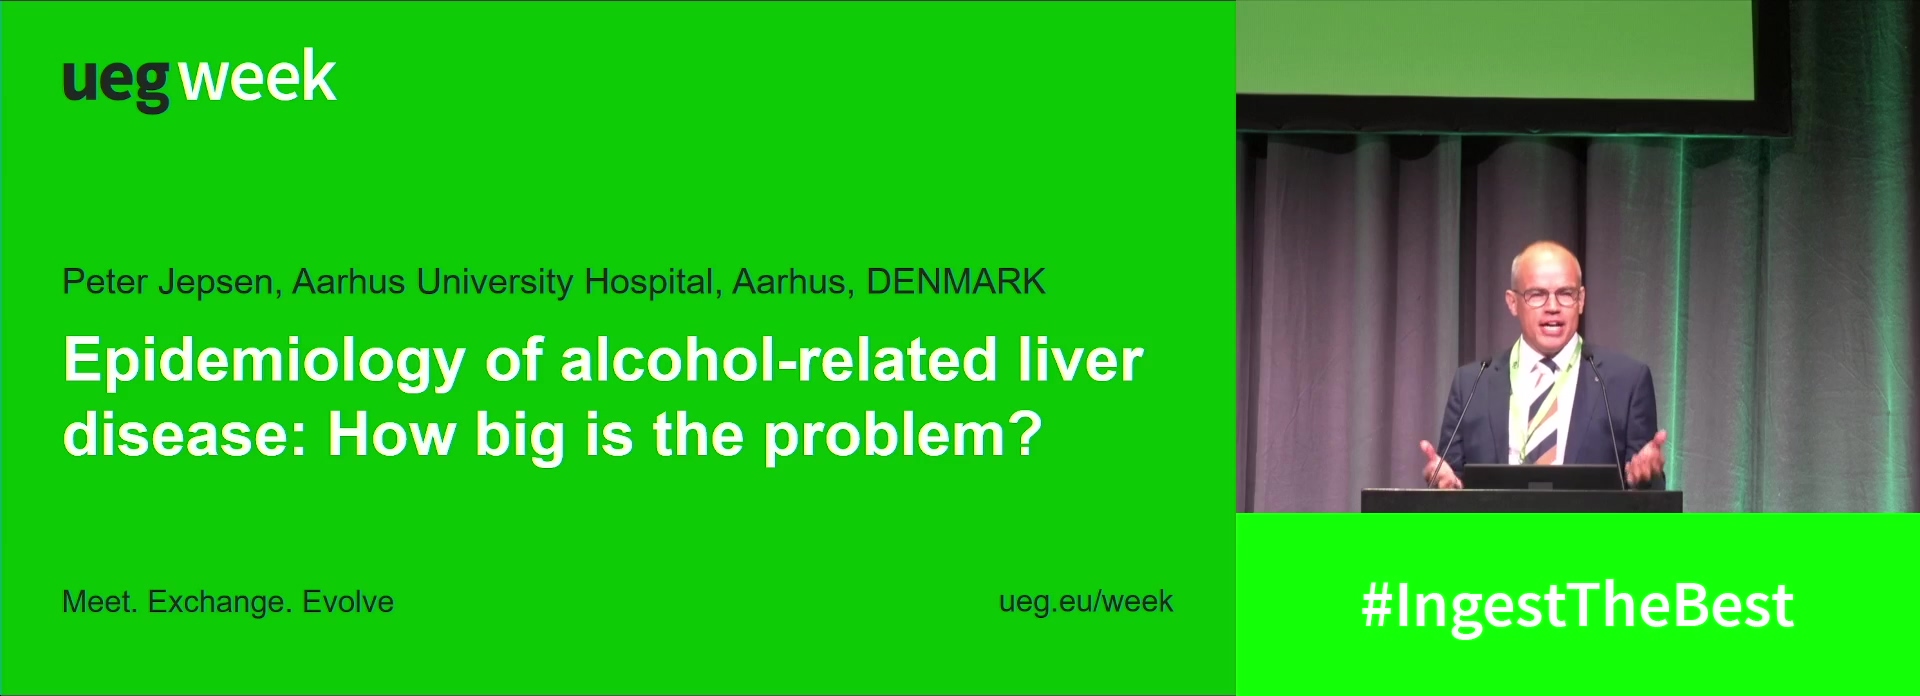 Epidemiology of alcohol-related liver disease: How big is the problem?